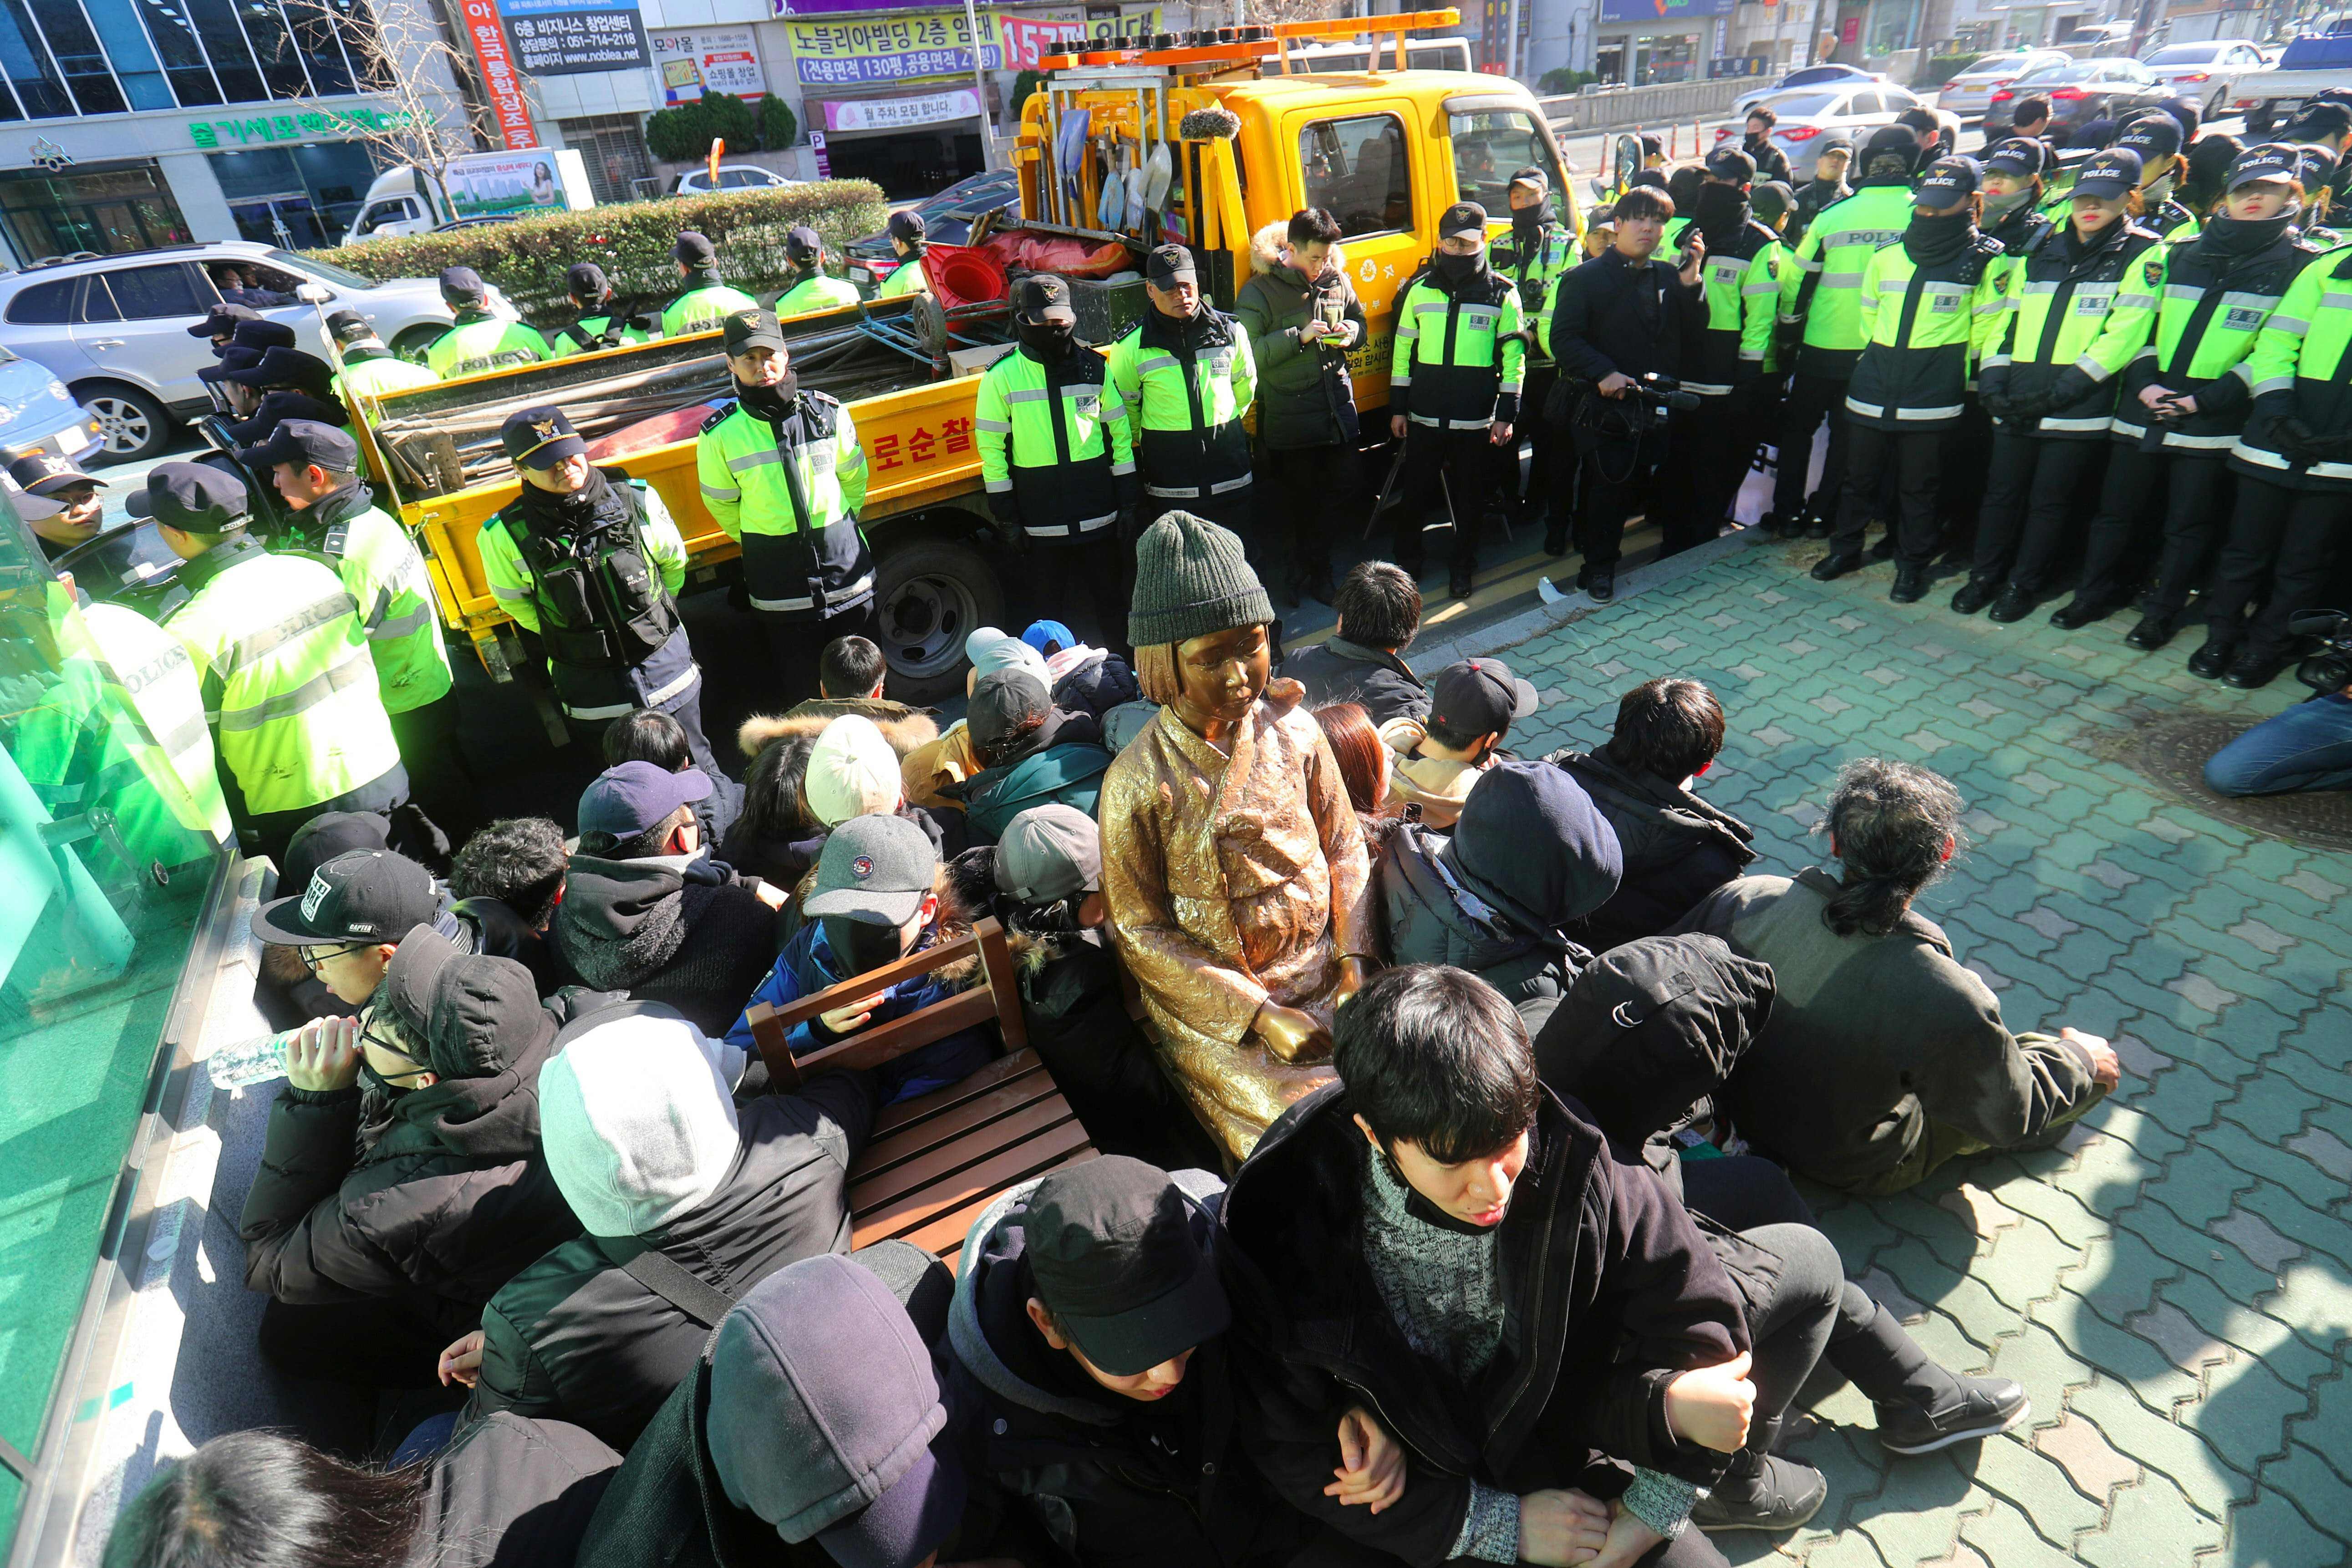 This picture taken on Dec. 28, 2016, shows South Korean activists staging a sit-in protest around a statue in Busan of a teenage girl symbolizing former 'comfort women' who served as sex slaves for Japanese soldiers during World War II. | AFP-JIJI